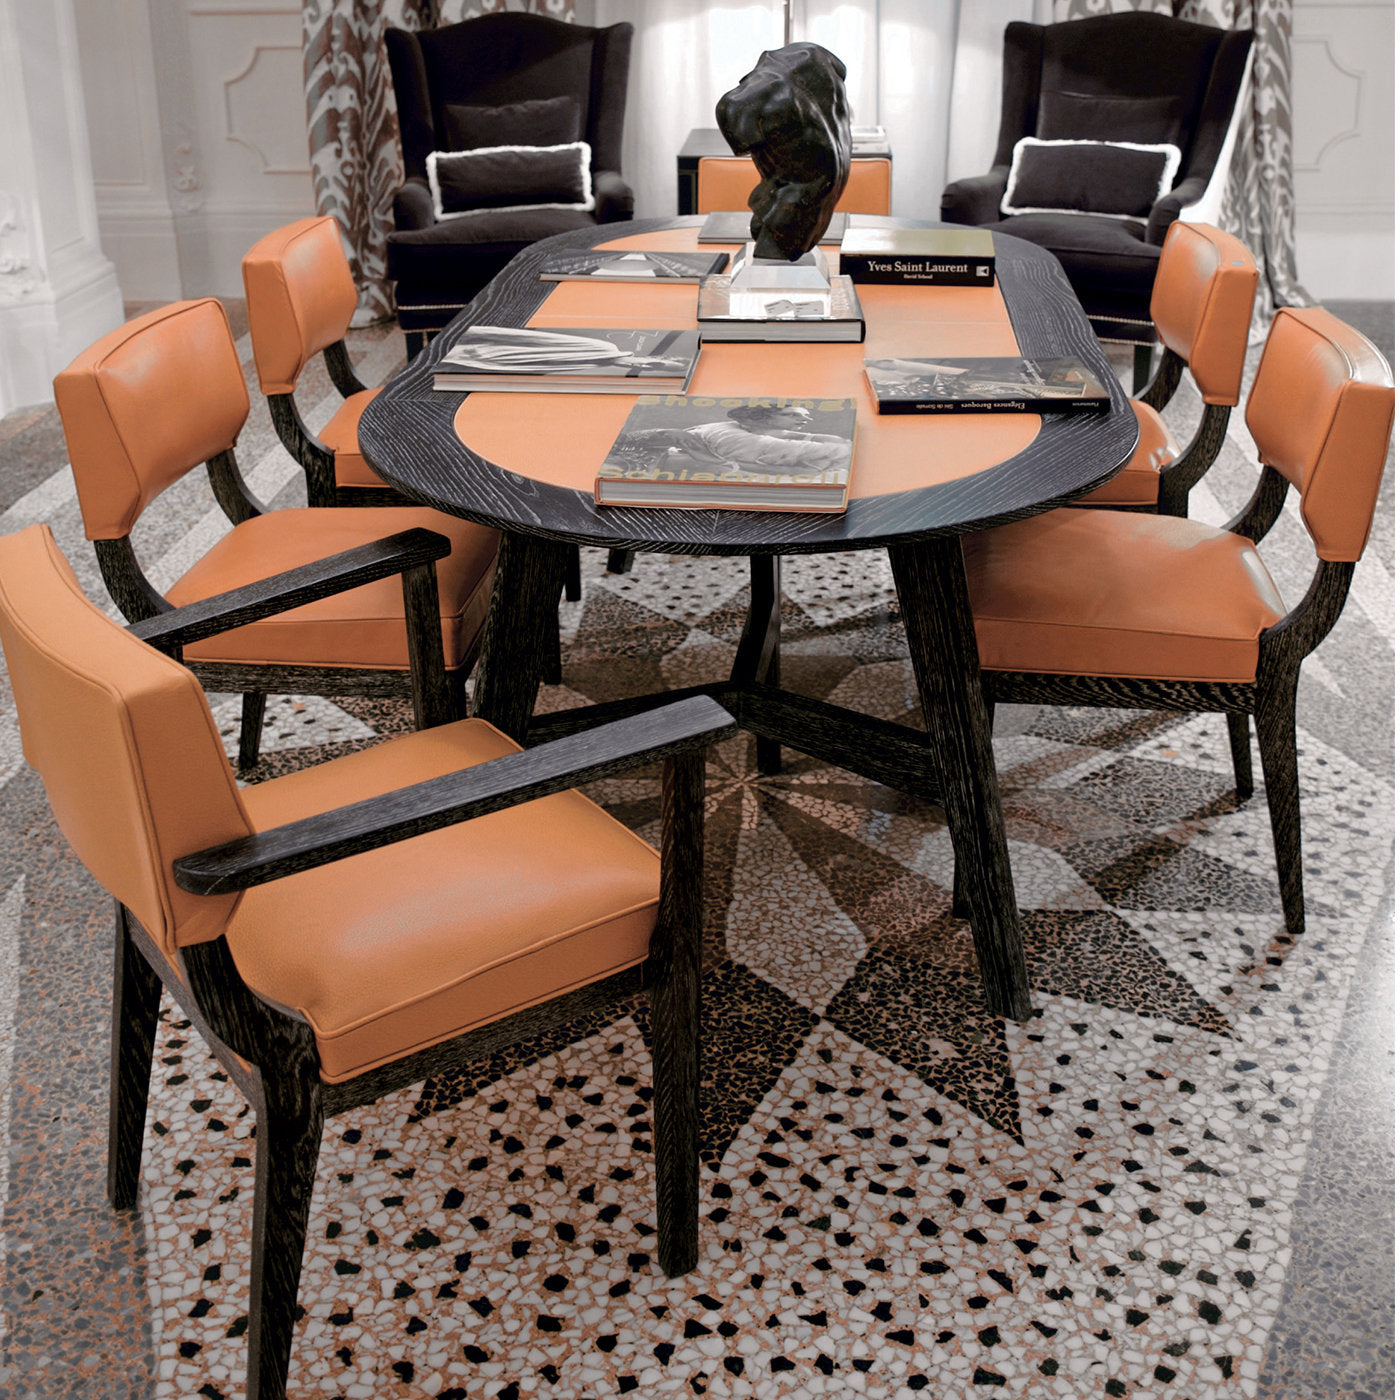 Oval Dining Table by Michele Bonan - Alternative view 1